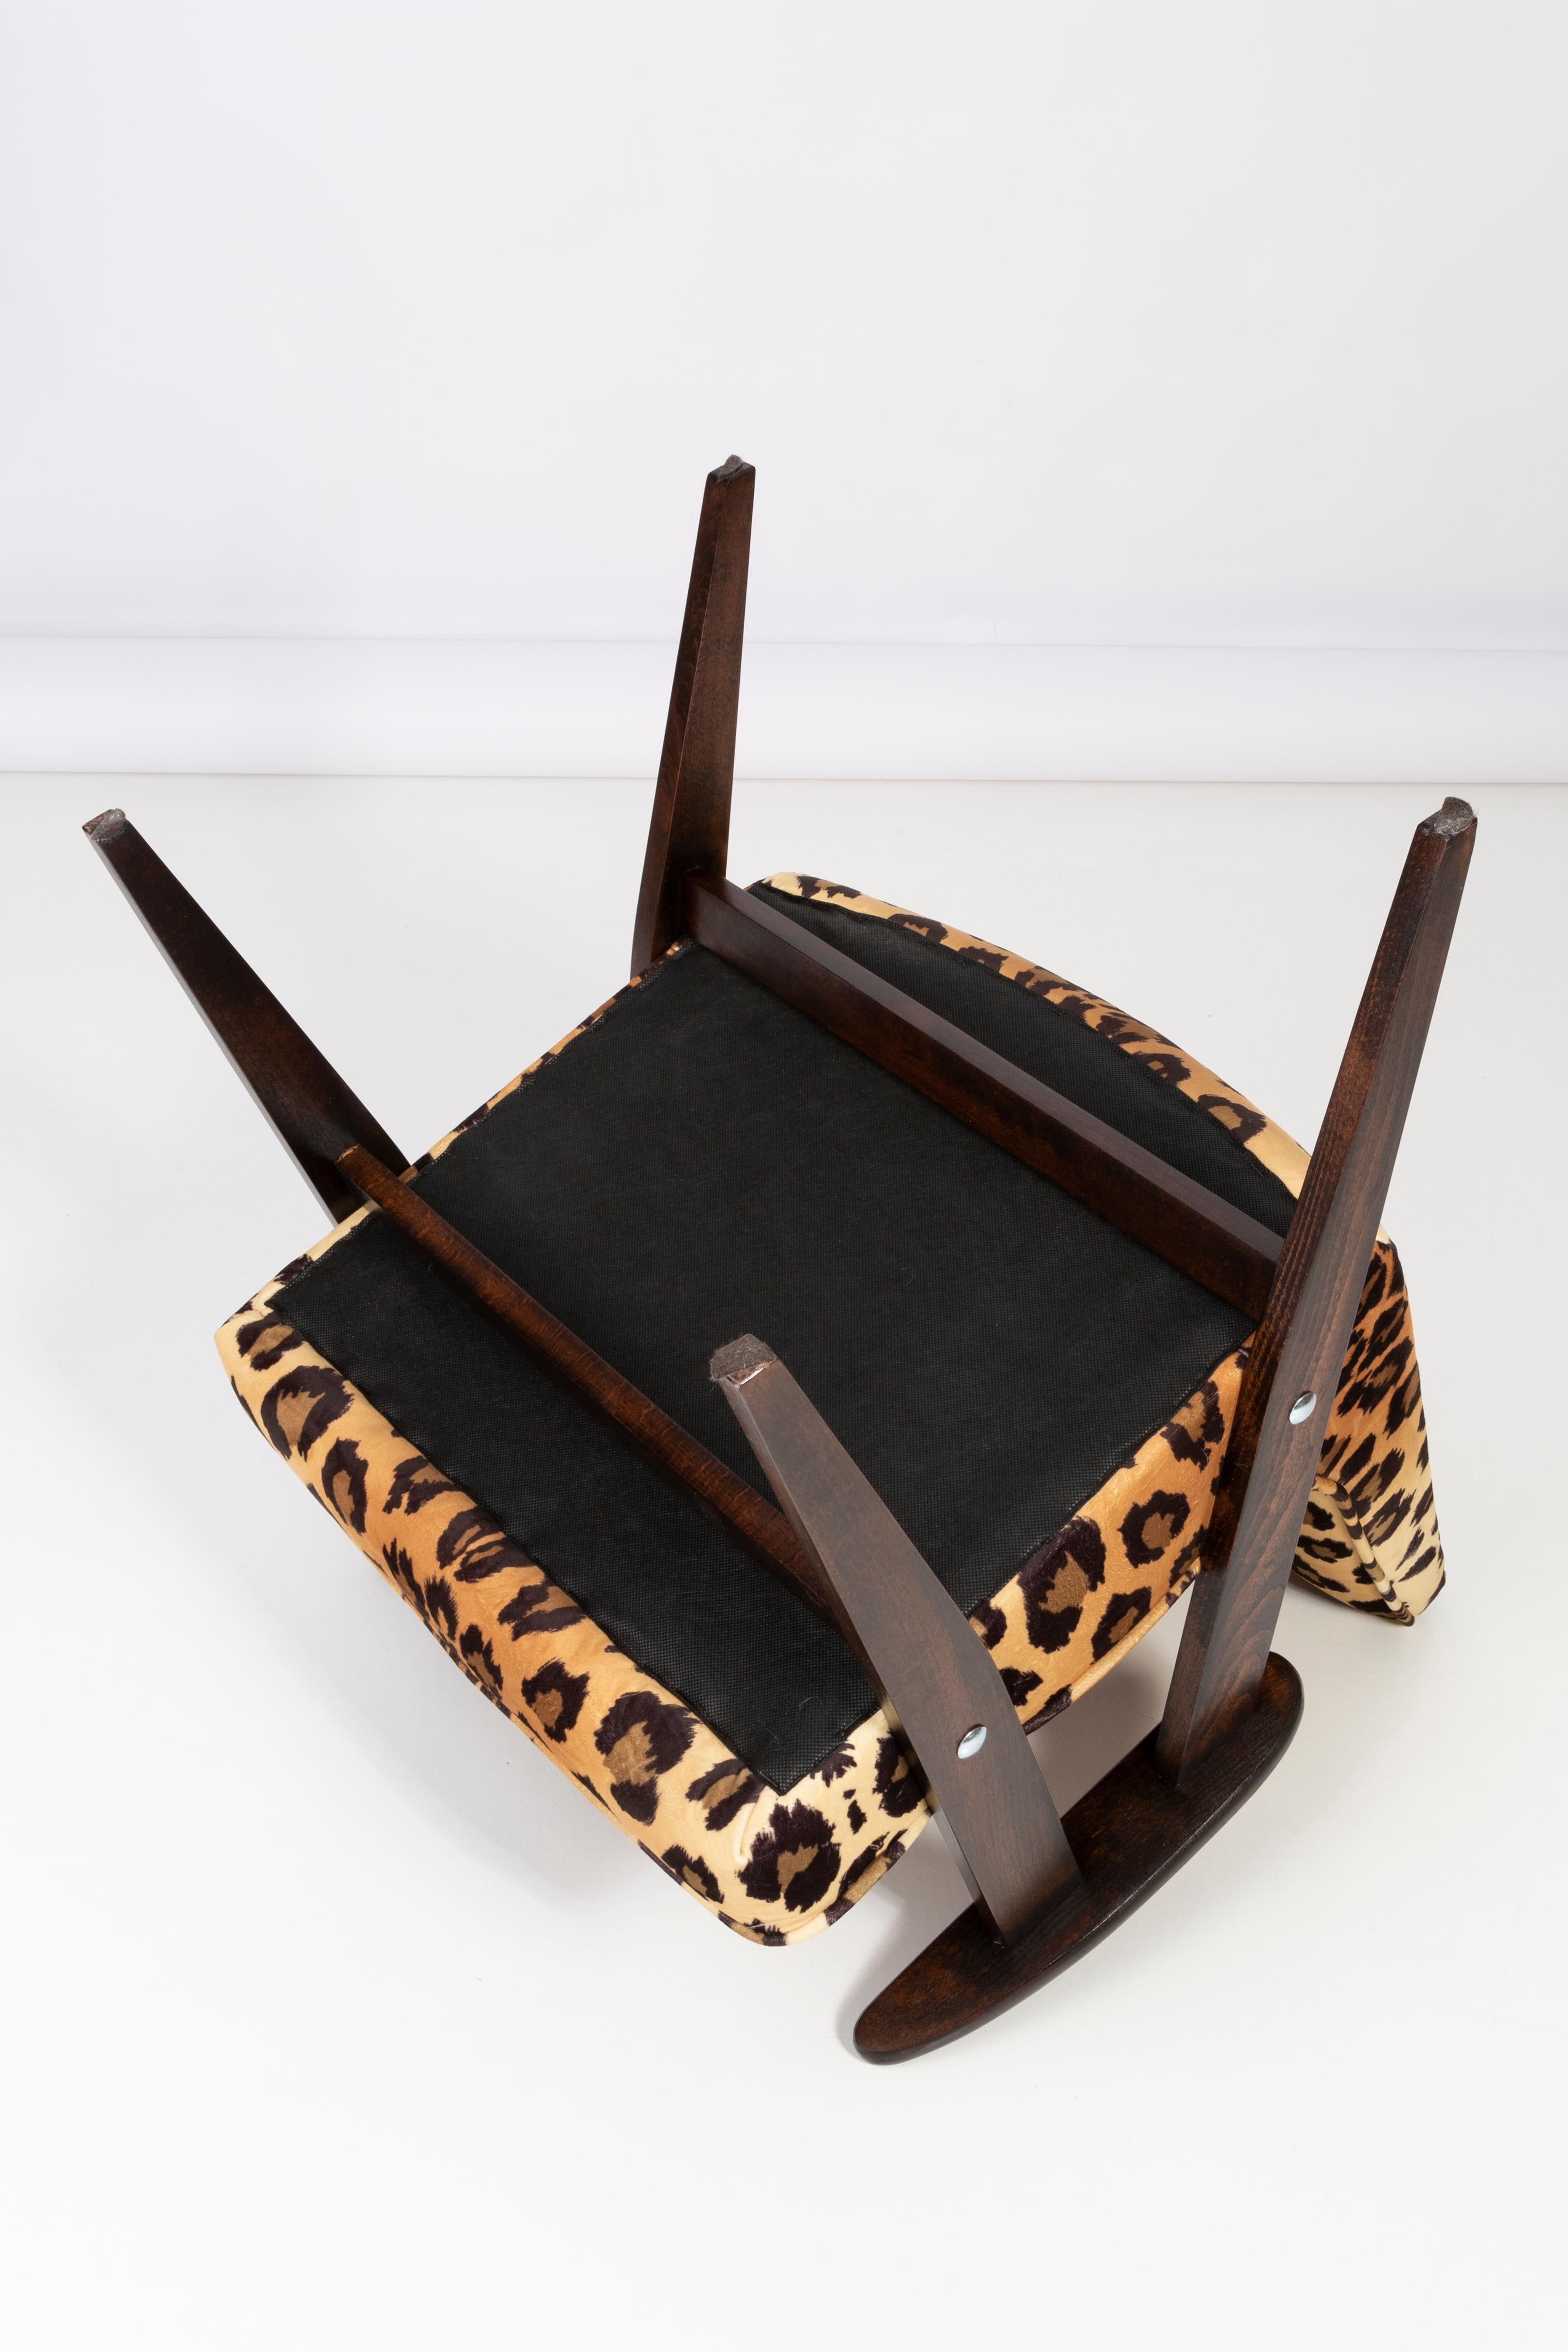 Six Midcentury 366 Armchairs in Leopard Print Velvet, Jozef Chierowski, 1960s For Sale 4